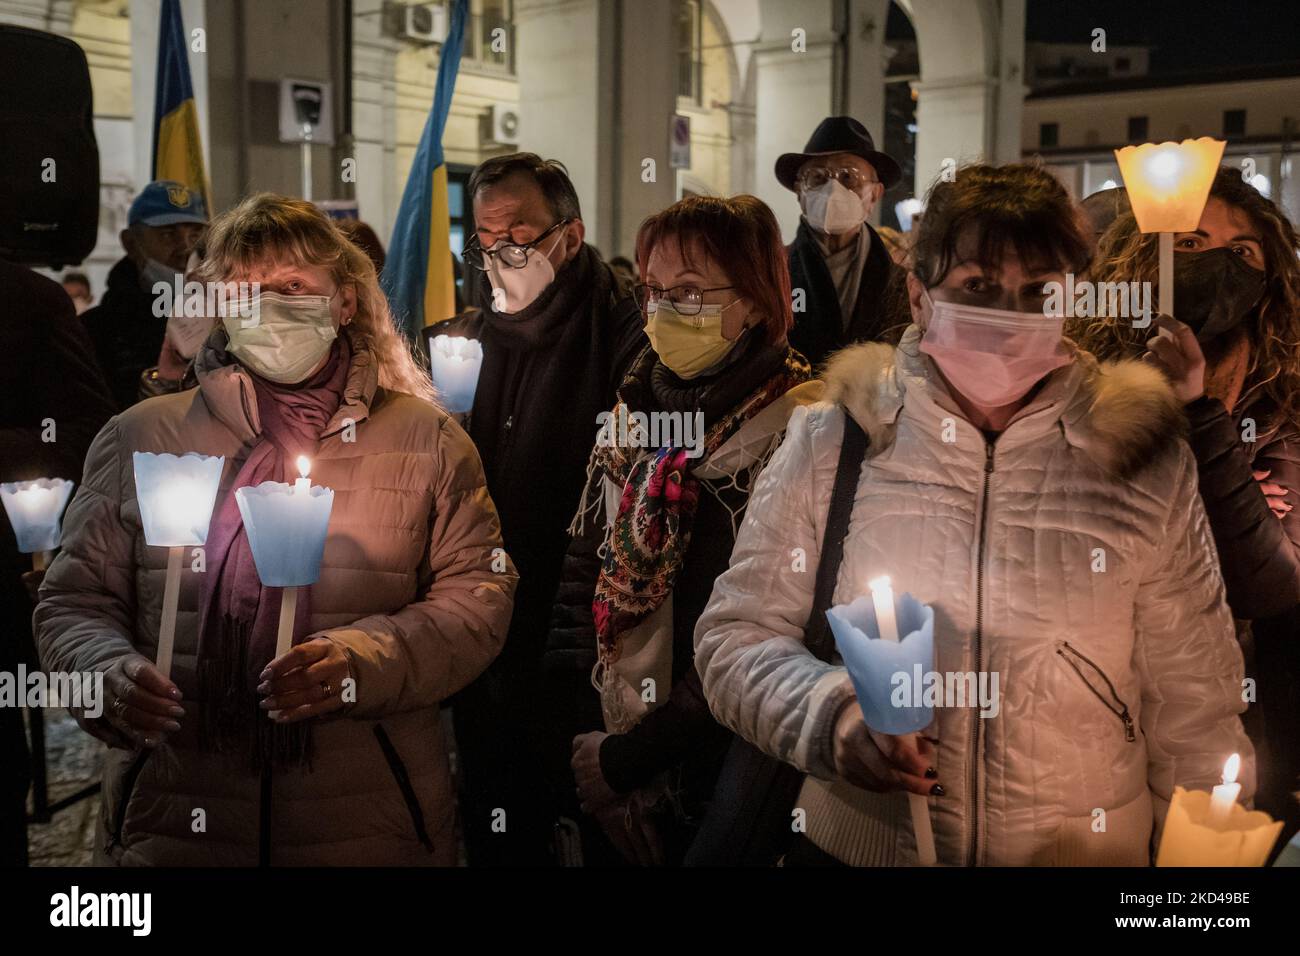 A moment of the demonstration for peace, against the war in Ukraine, and the continuous attacks on Ukrainian territory by Russia, at the Piazza del Municipio in Aversa (CE), South Italy, on 2 March 2022, where Italian citizens and members of the local Ukrainian community gathered to protest. (Photo by Manuel Dorati/NurPhoto) Stock Photo